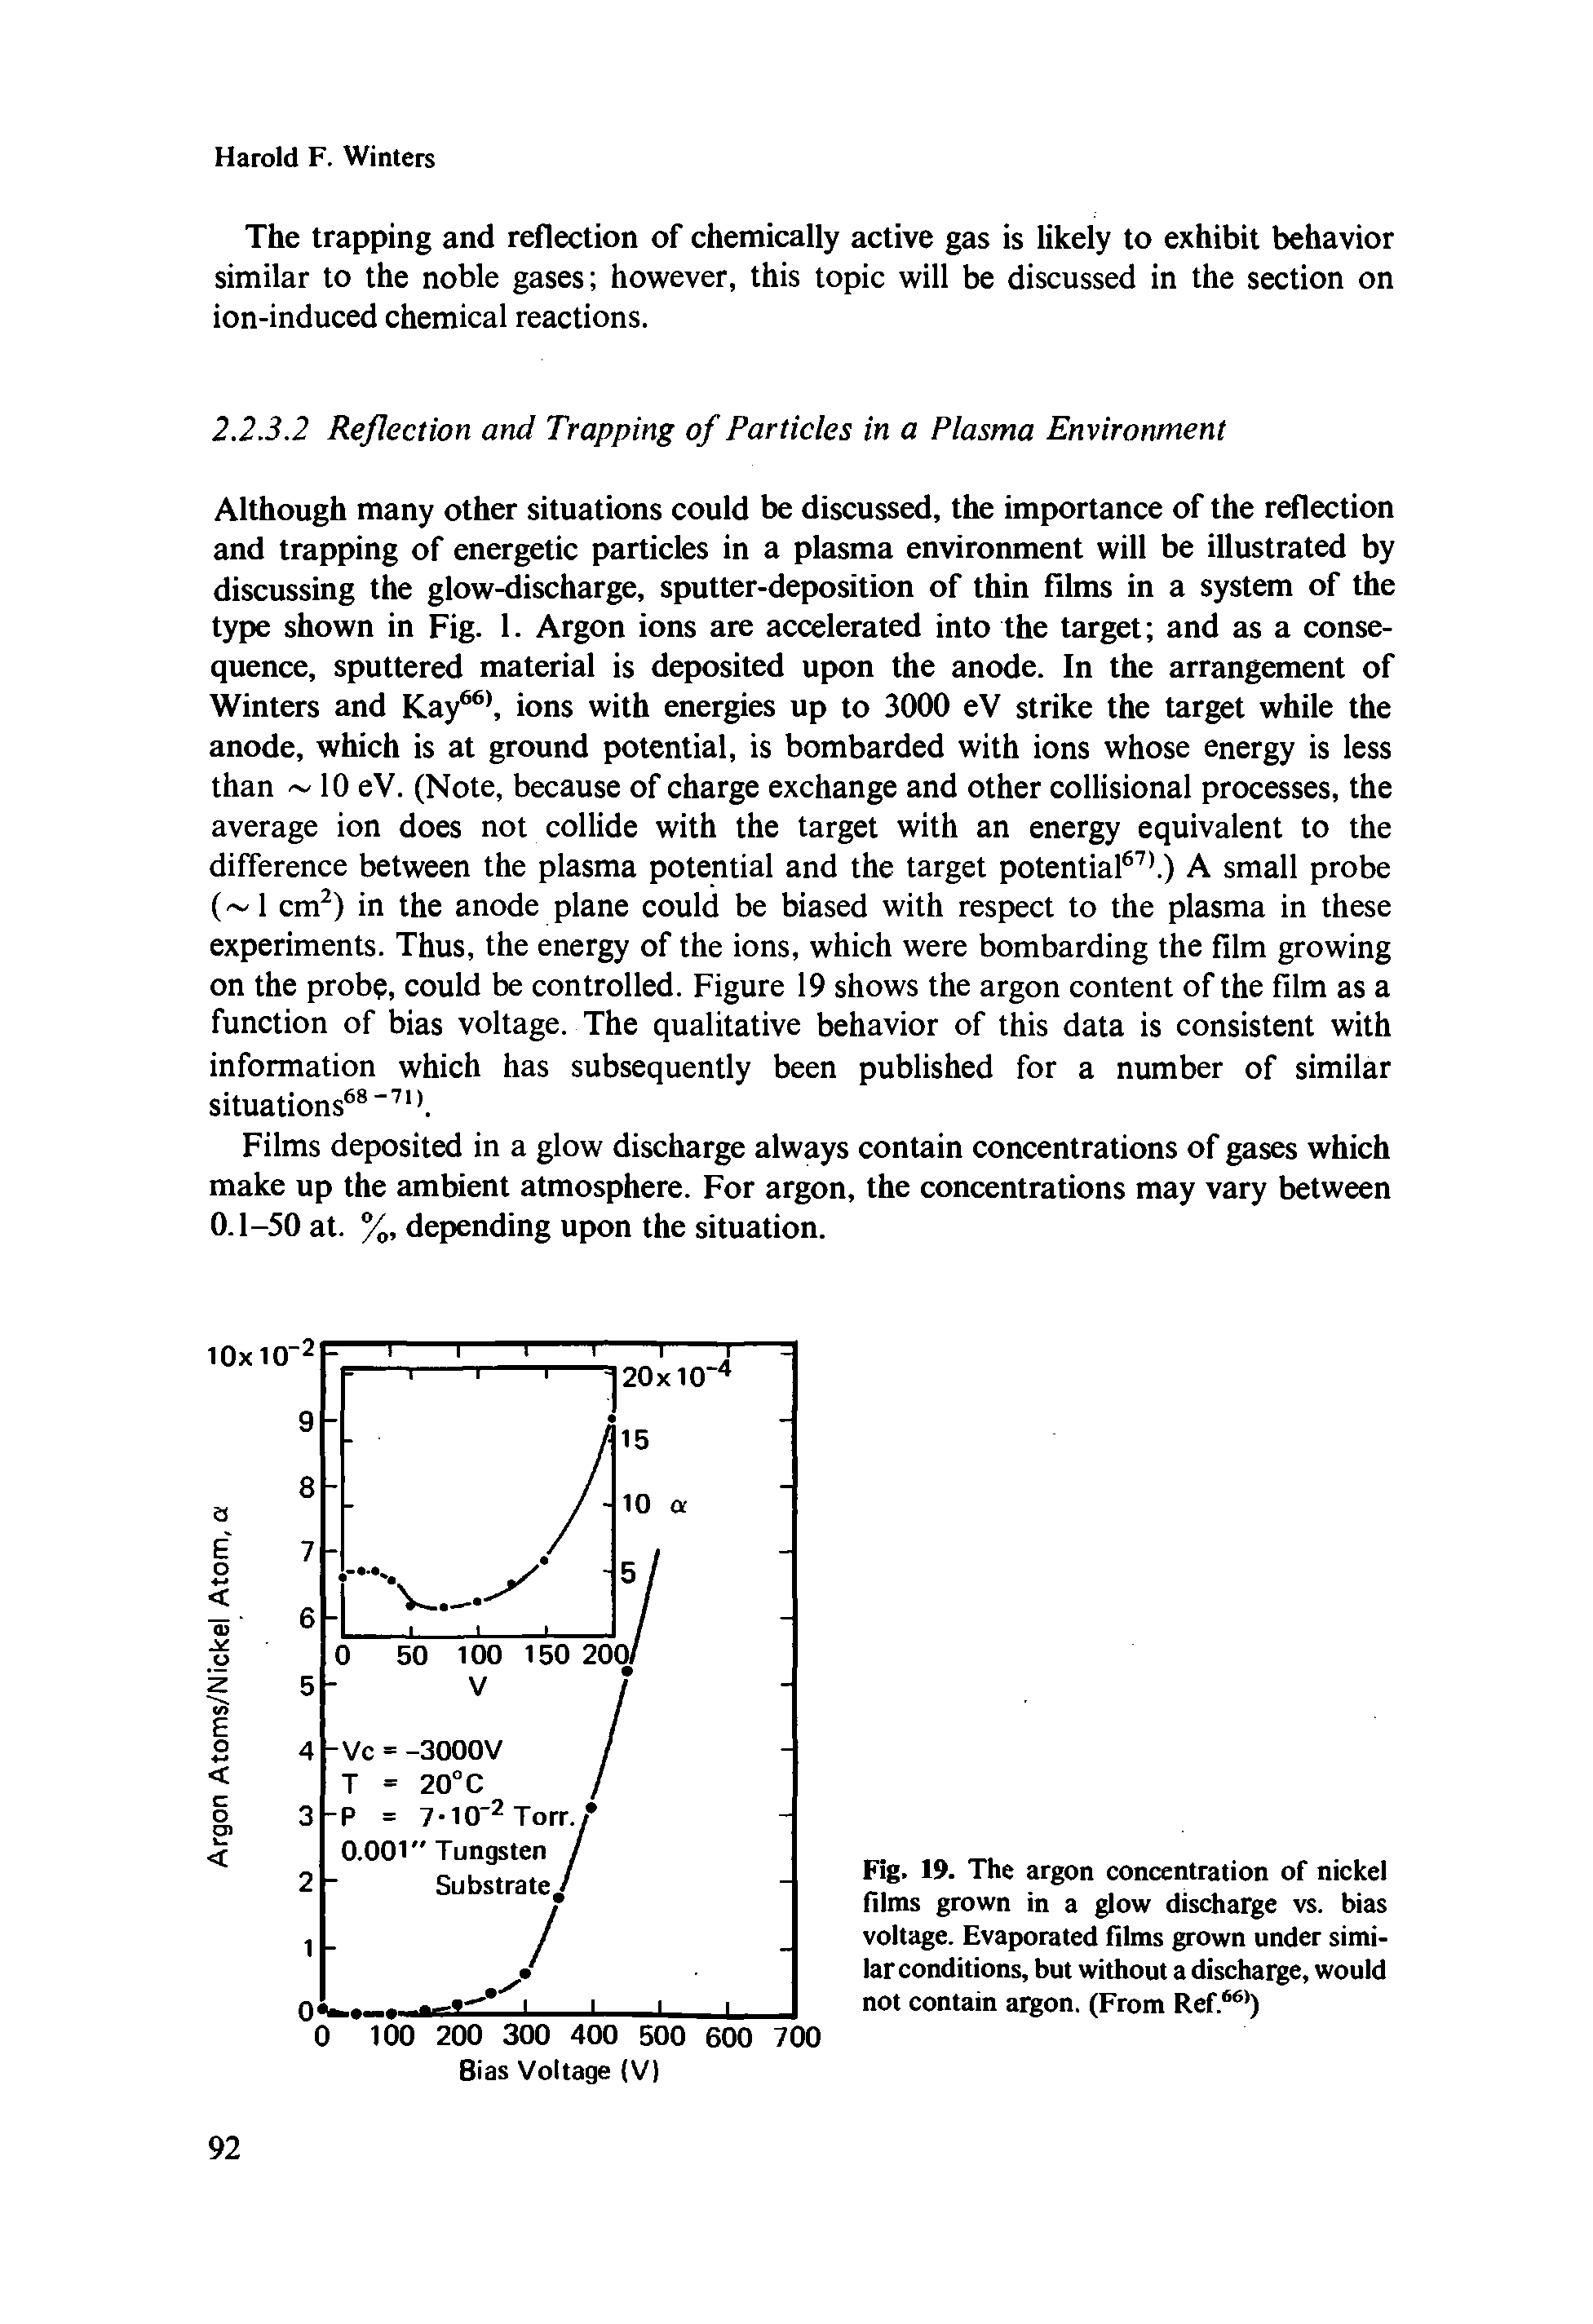 Fig. 19. The argon concentration of nickel films grown in a glow discharge vs. bias voltage. Evaporated films grown under similar conditions, but without a discharge, would not contain argon. (From Ref. )...